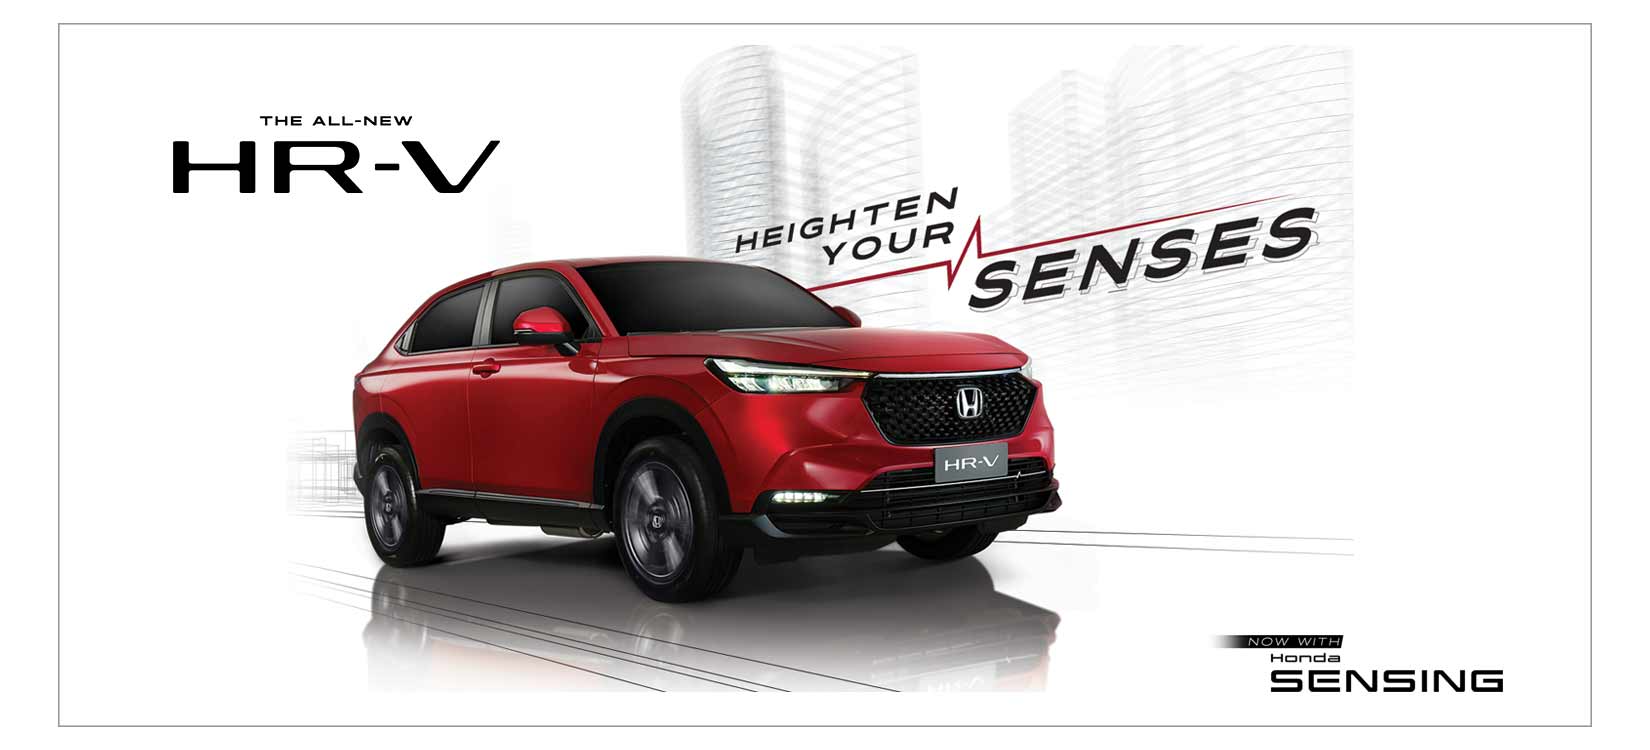 The All-New Honda HR-V enters the Philippines with VTEC Turbo Engine and Honda SENSING